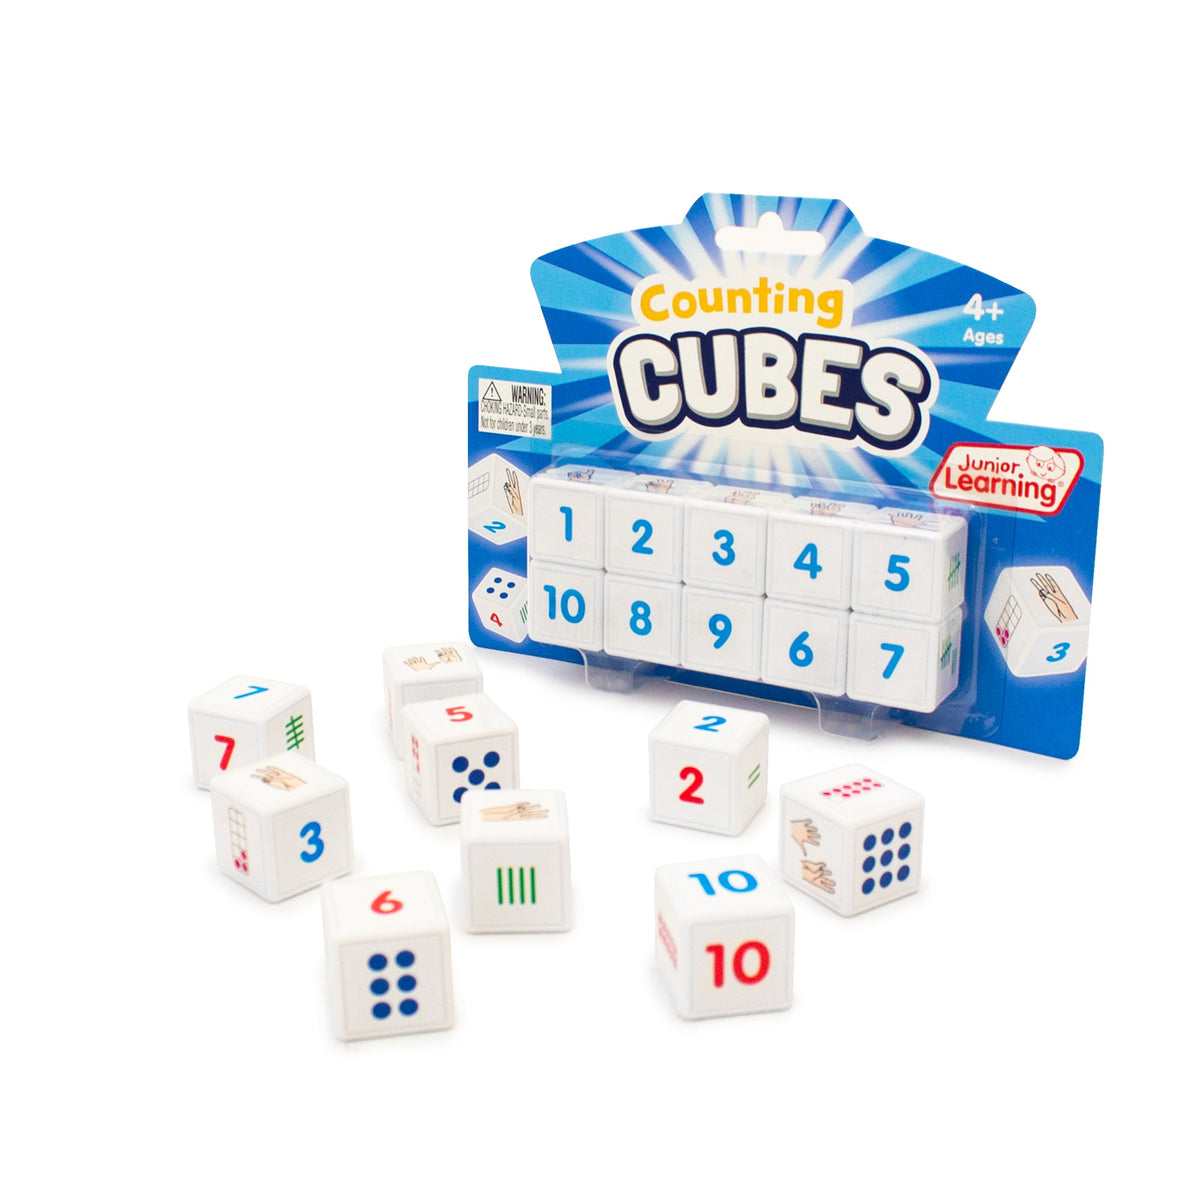 Junior Learning JL645 Counting Cubes packaging and pieces